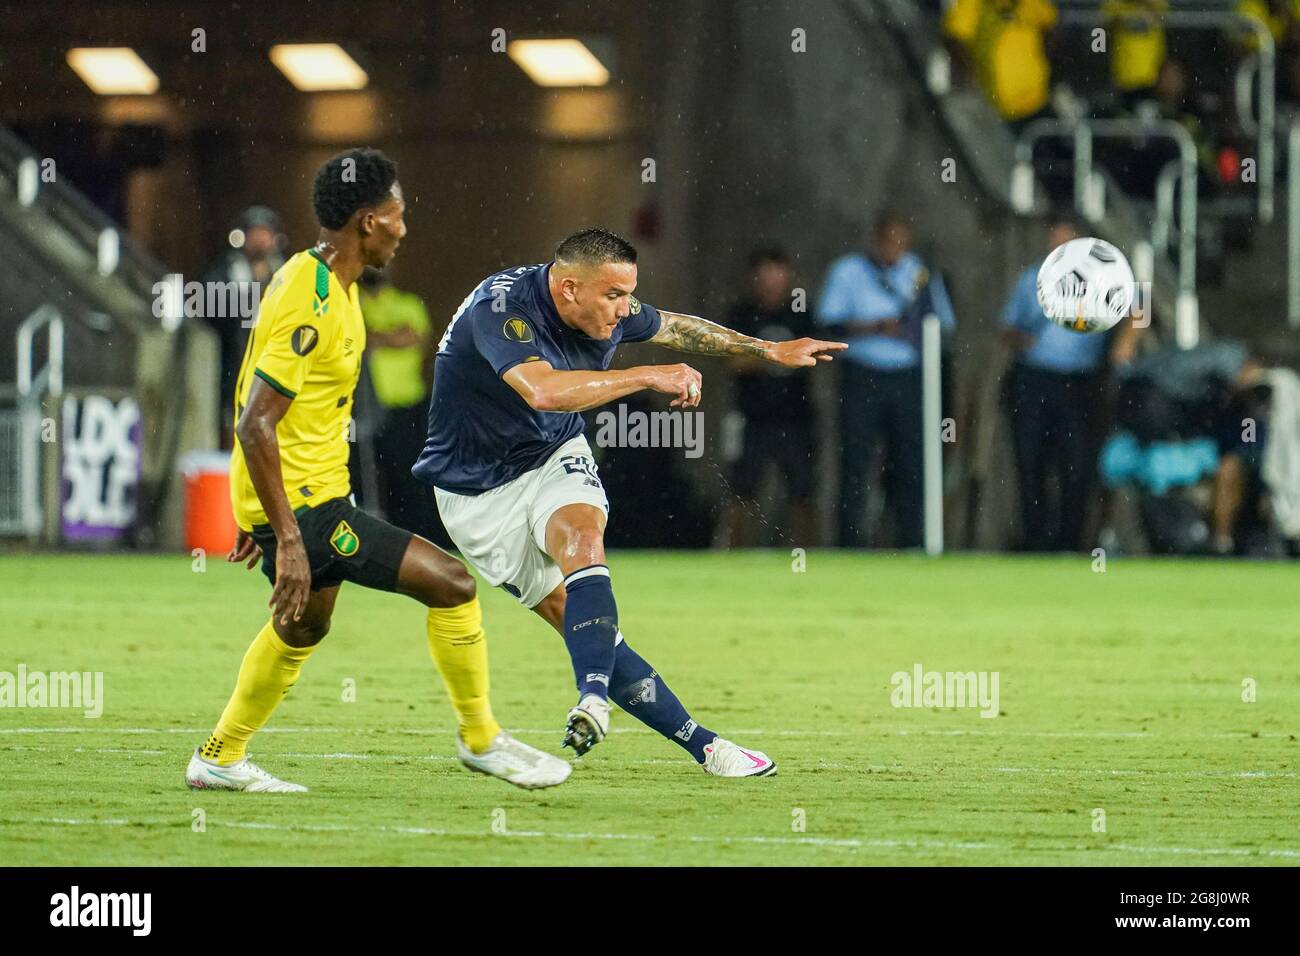 Fort Lauderdale, Florida, USA, July 20, 2021, Costa Rica midfielder David Guzman #20 makes a pass during the Concacaf Gold Cup at Exploria Stadium.  (Photo Credit:  Marty Jean-Louis) Credit: Marty Jean-Louis/Alamy Live News Stock Photo